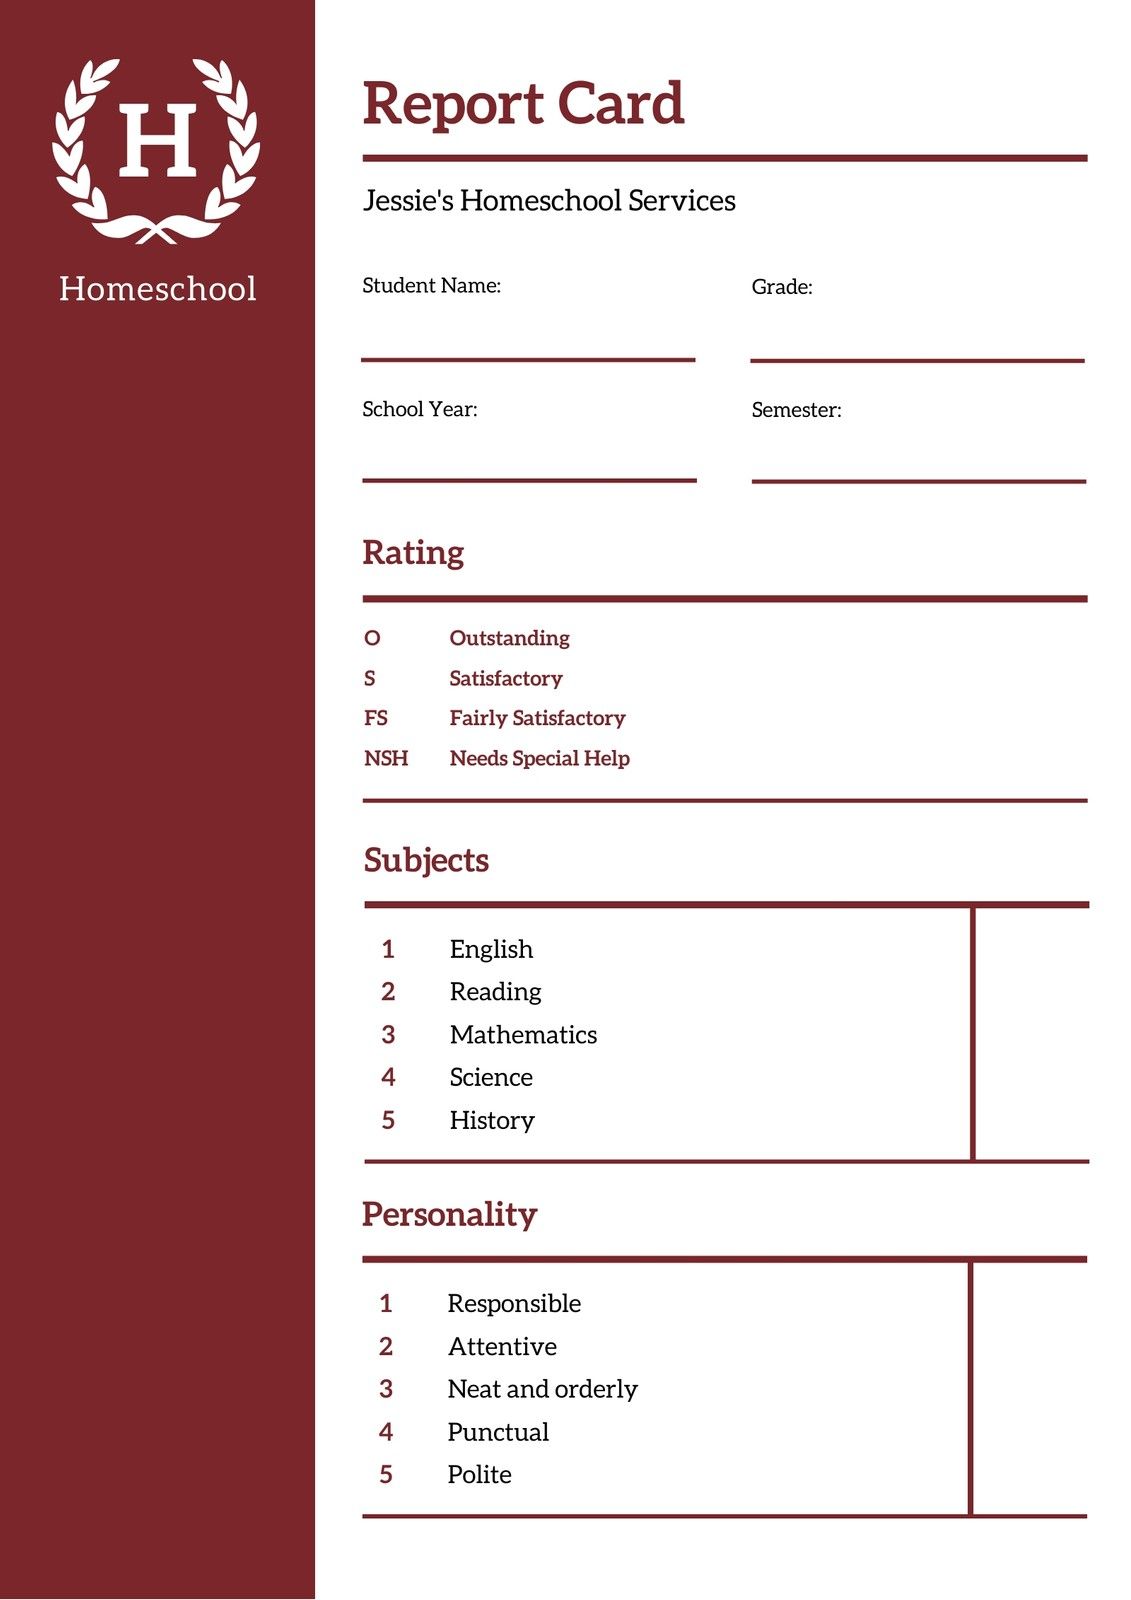 Maroon and White Homeschool Report Card - Templates by Canva | Report